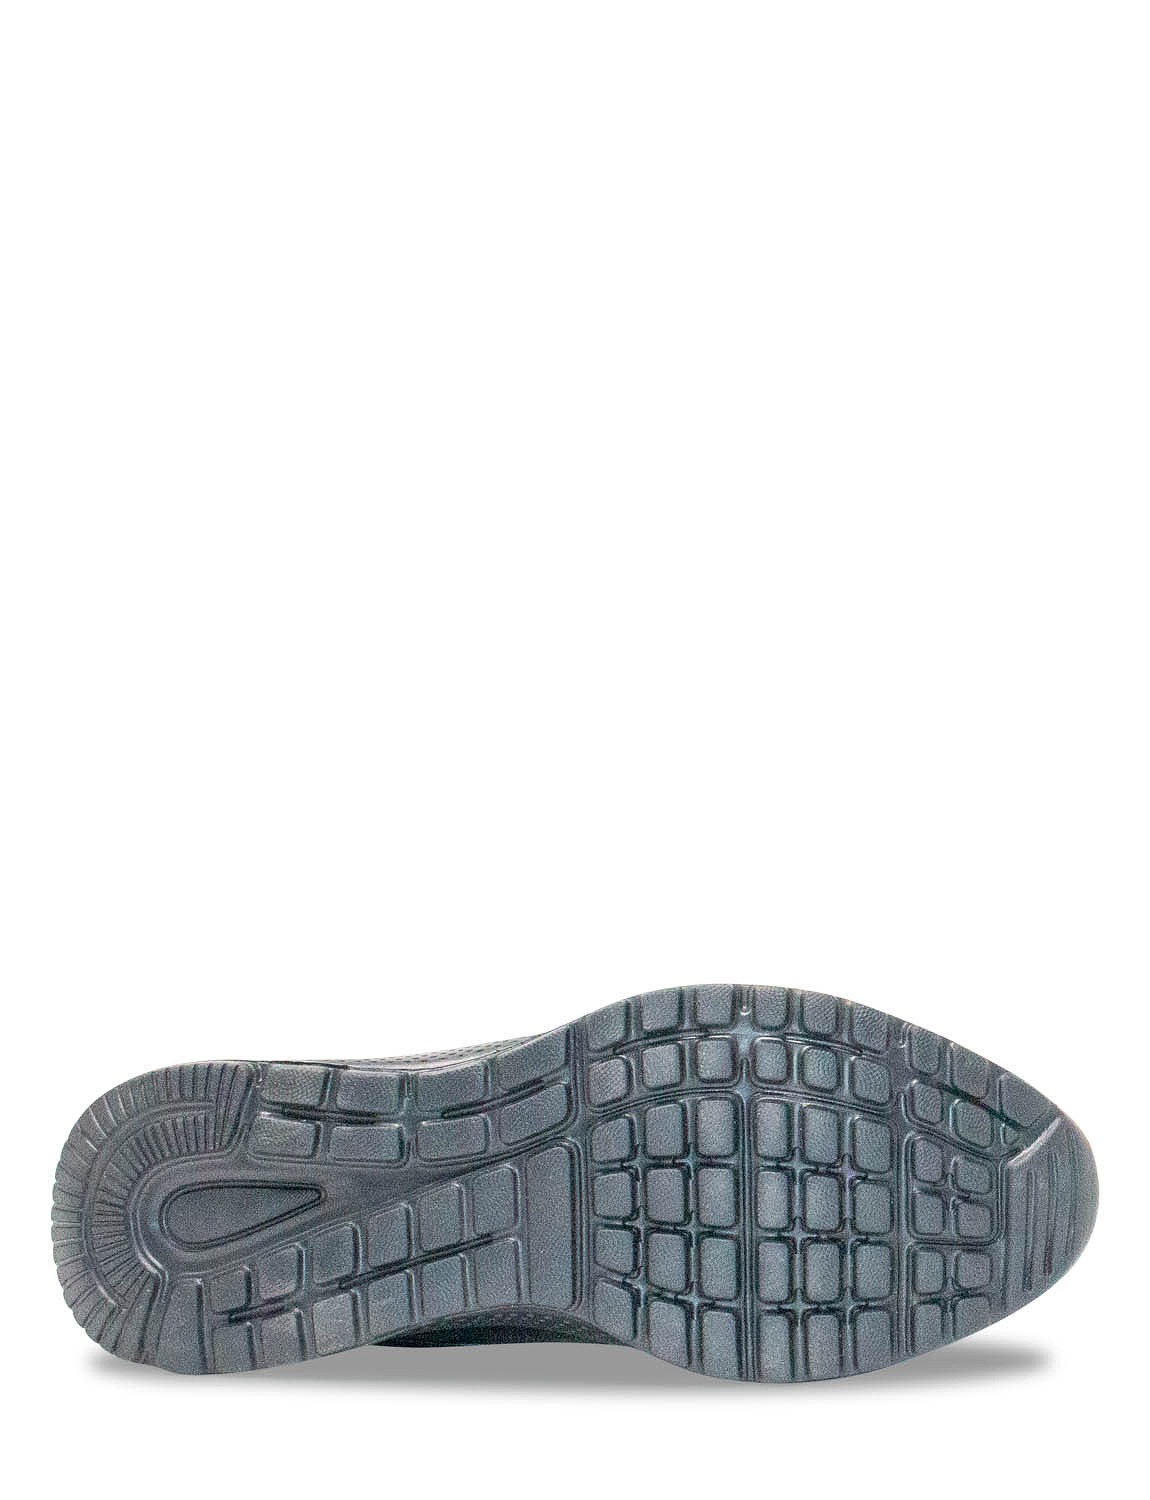 Pegasus Slip On Wide Fit Trainer | Chums